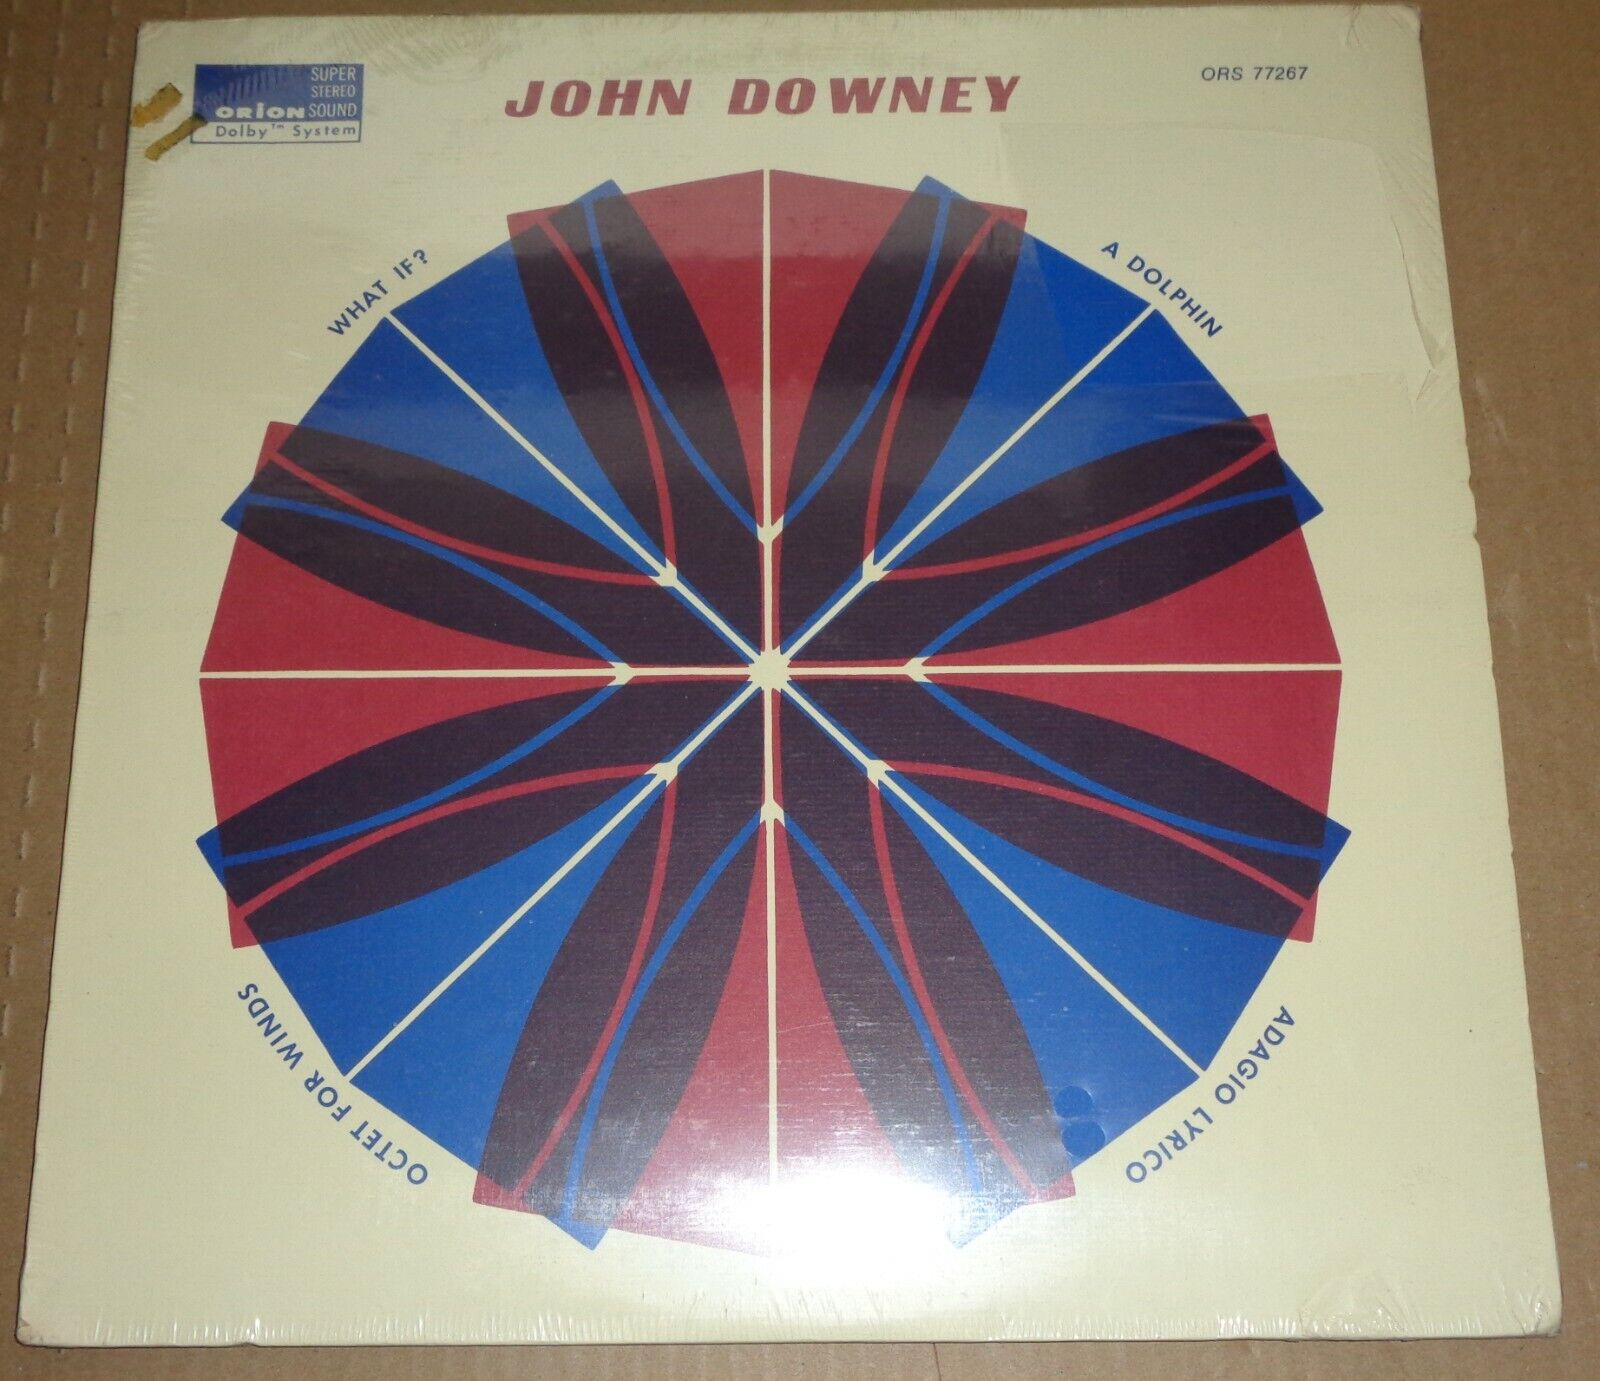 JOHN DOWNEY What If?, A Dolphin, Adagio Lyrico, Octet - Orion ORS 77267 SEALED